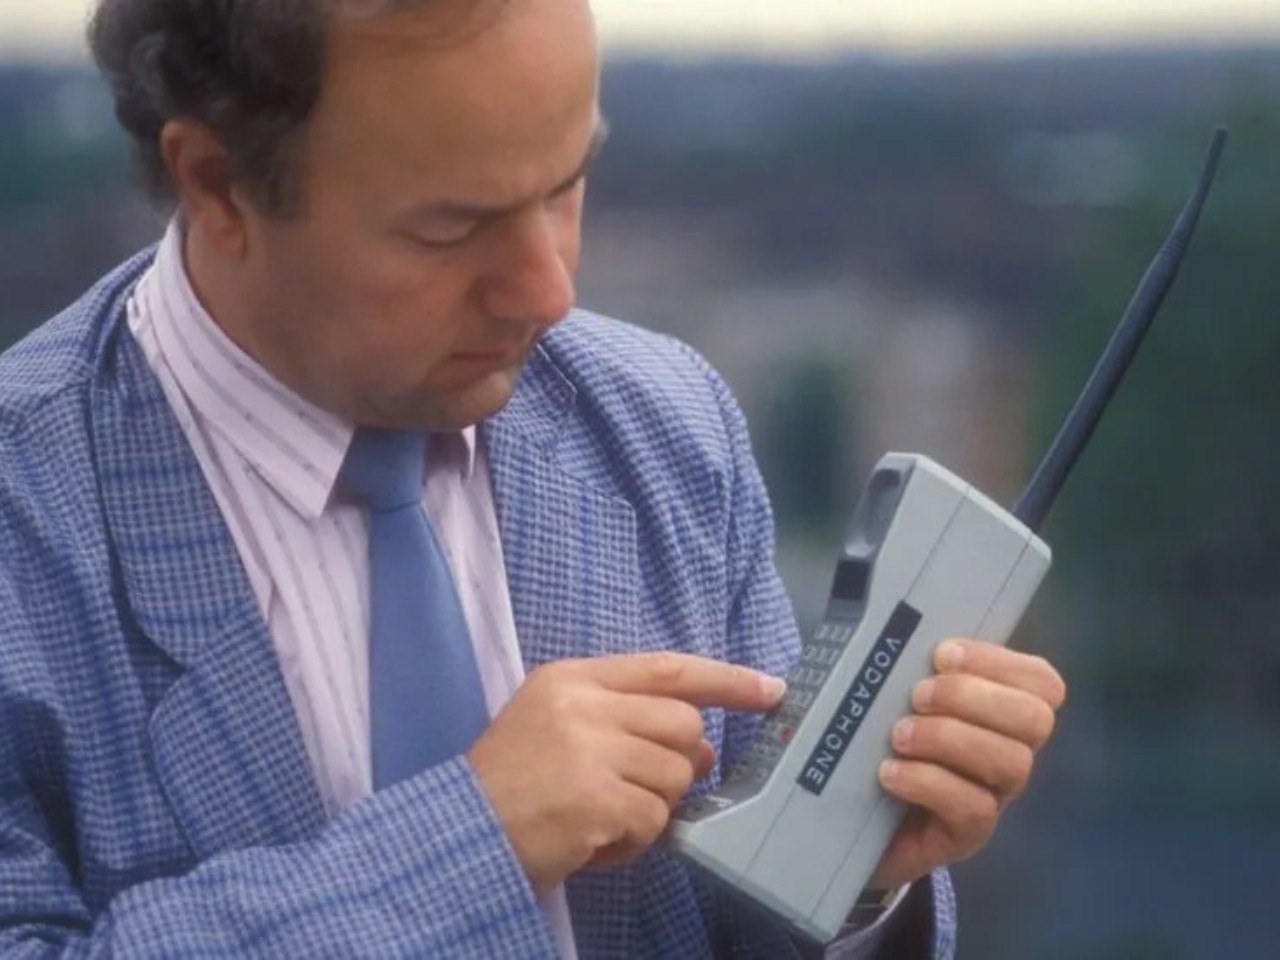 A BBC image of a man using an old mobile phone from the 1980s